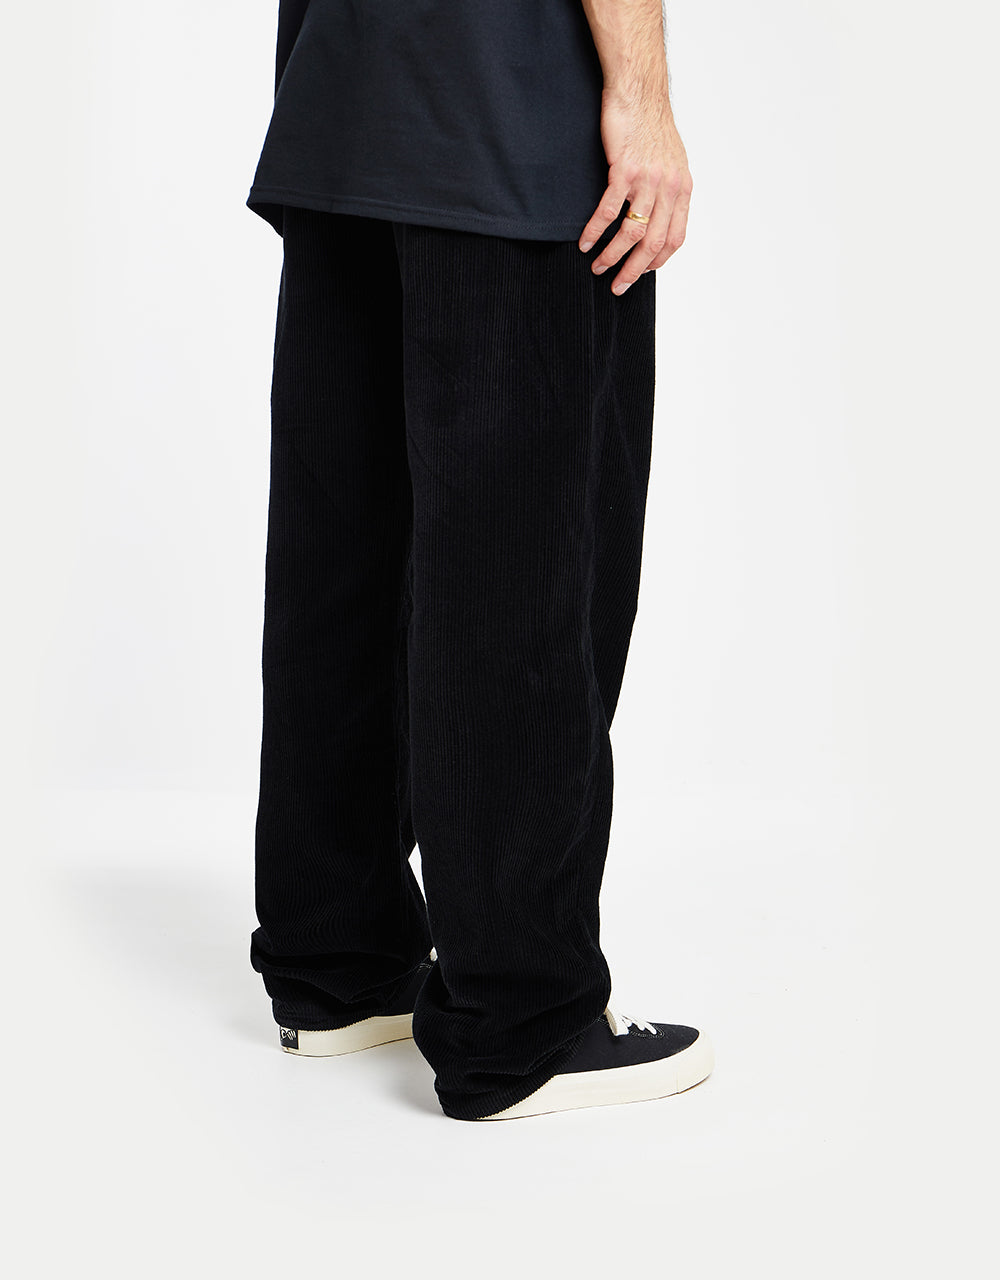 Route One Relaxed Fit Big Wale Cords - Black